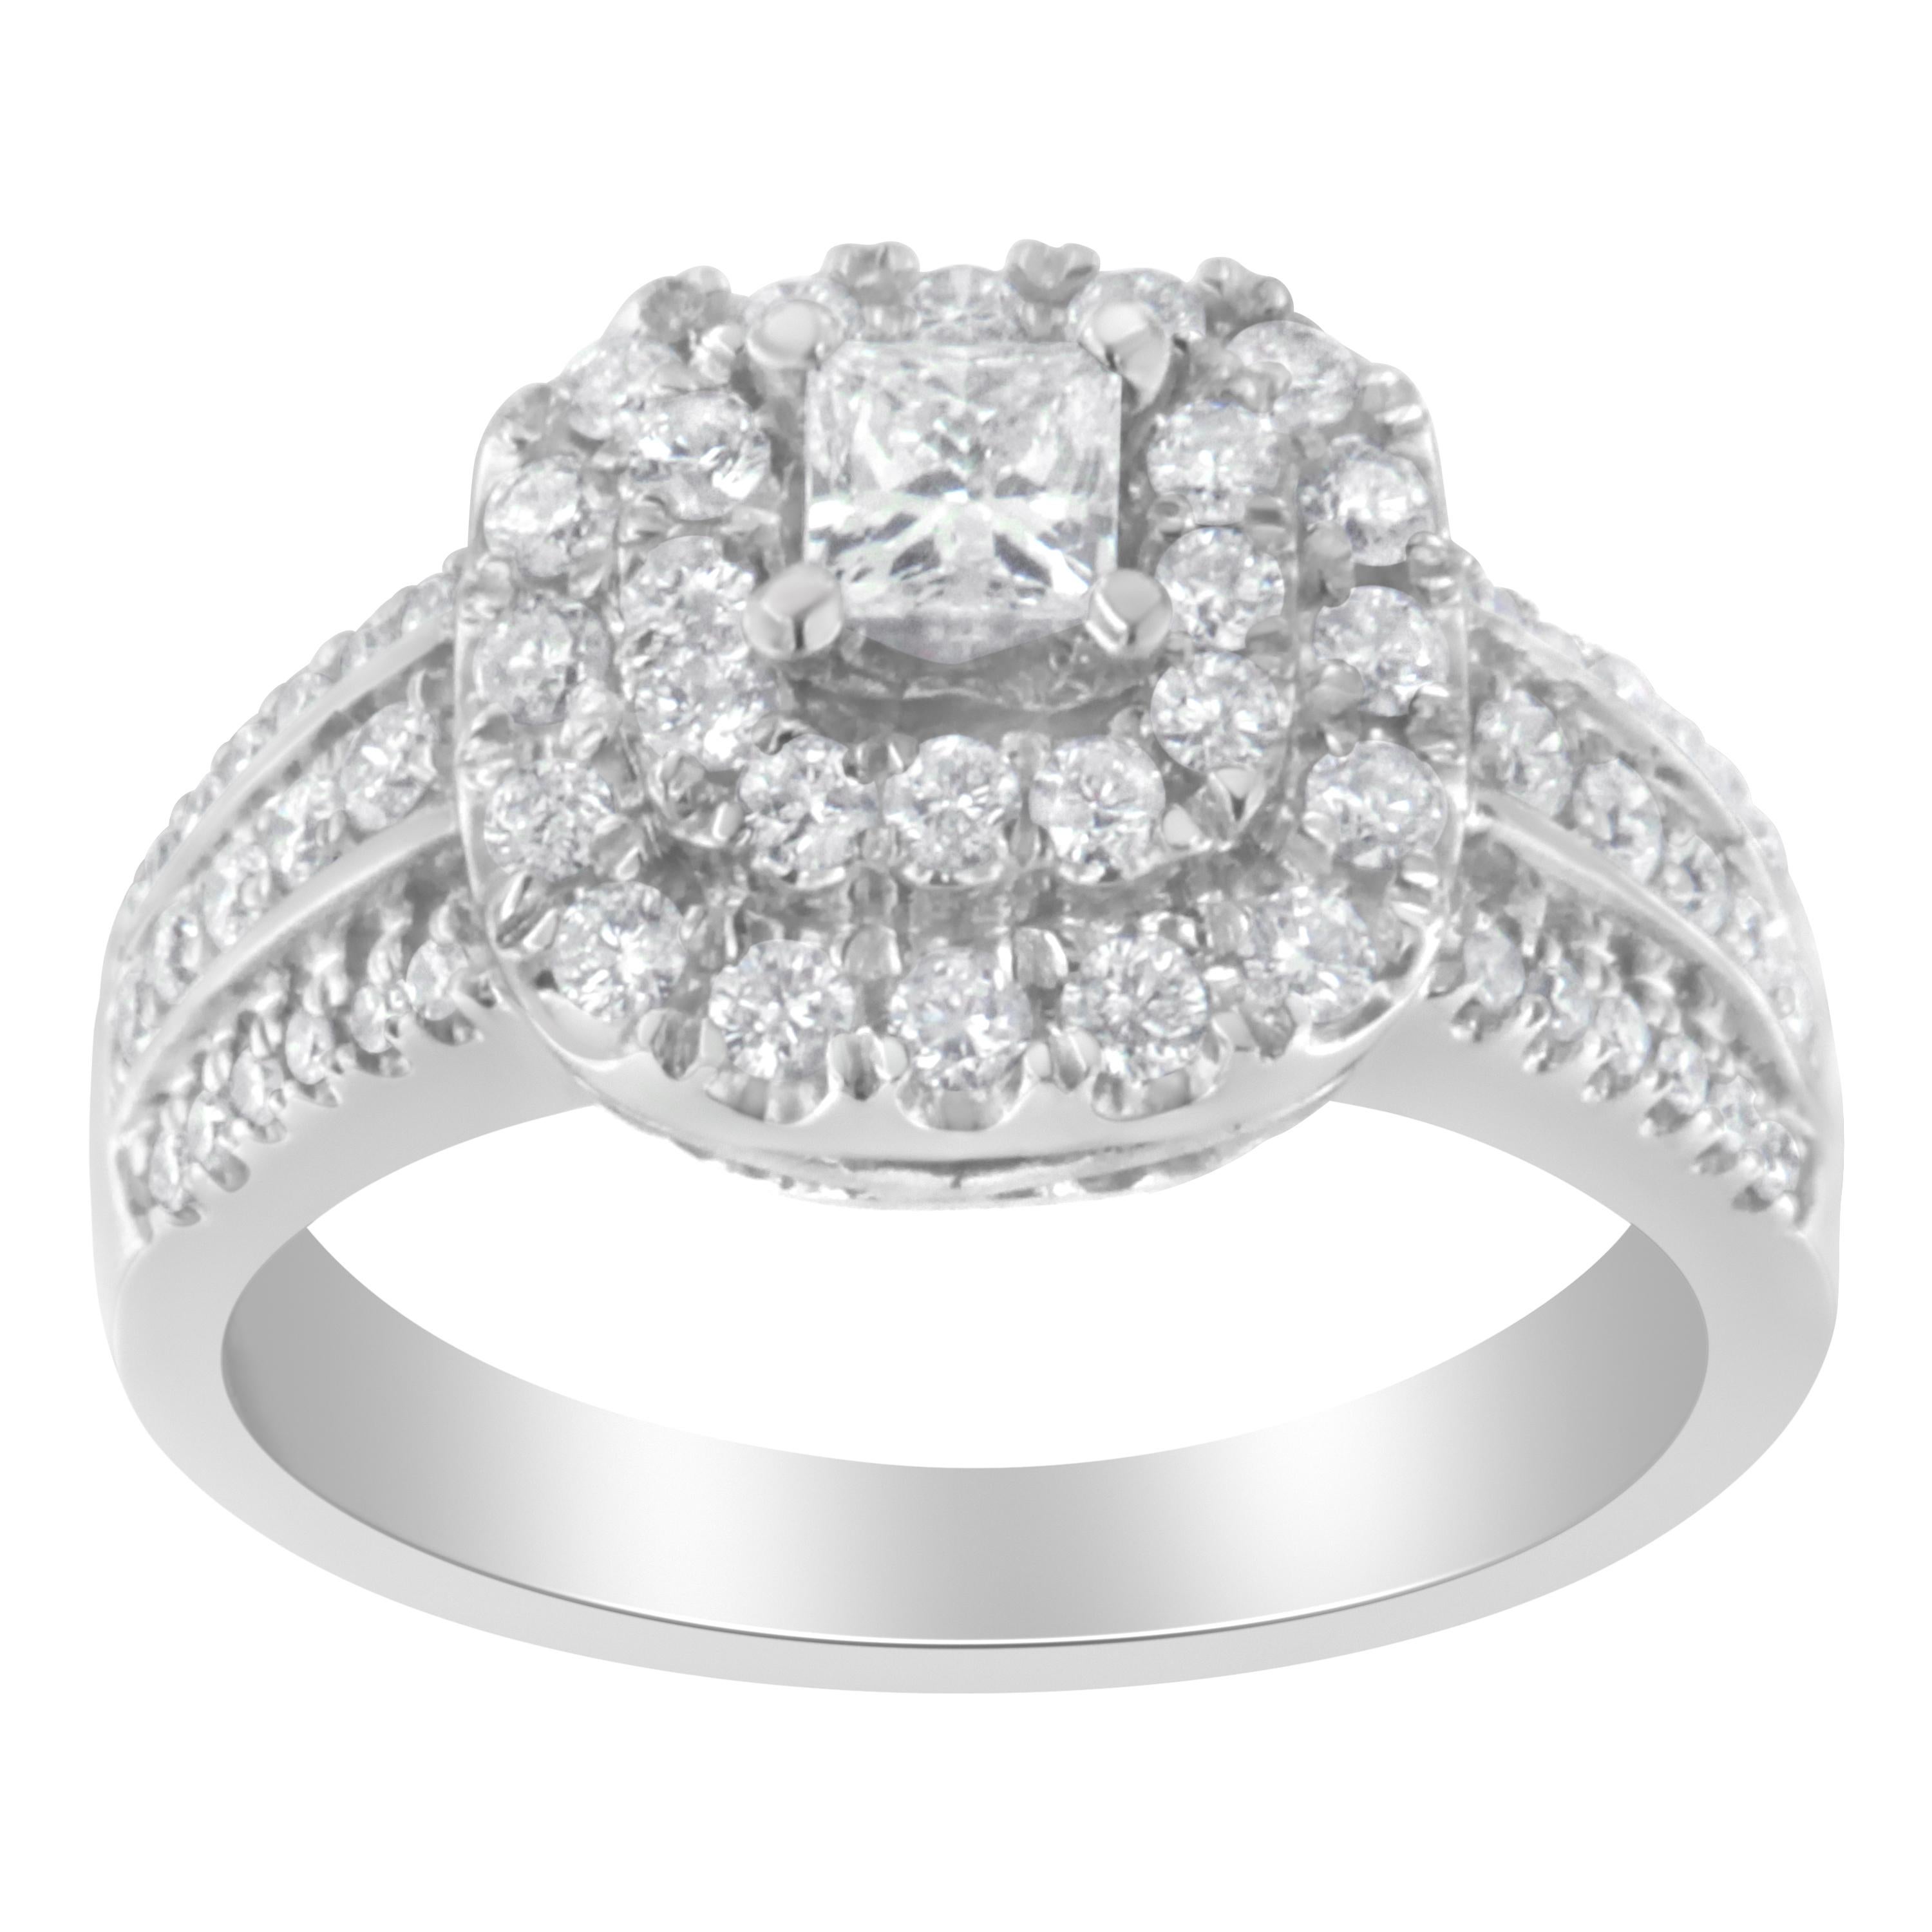 A diamond cluster ring that glimmers with a central princess cut diamond surrounded by a double halo of round diamonds. The wide band is crafted in 14 karat white gold and sparkles with three rows of round diamonds. The total diamond weight is 1